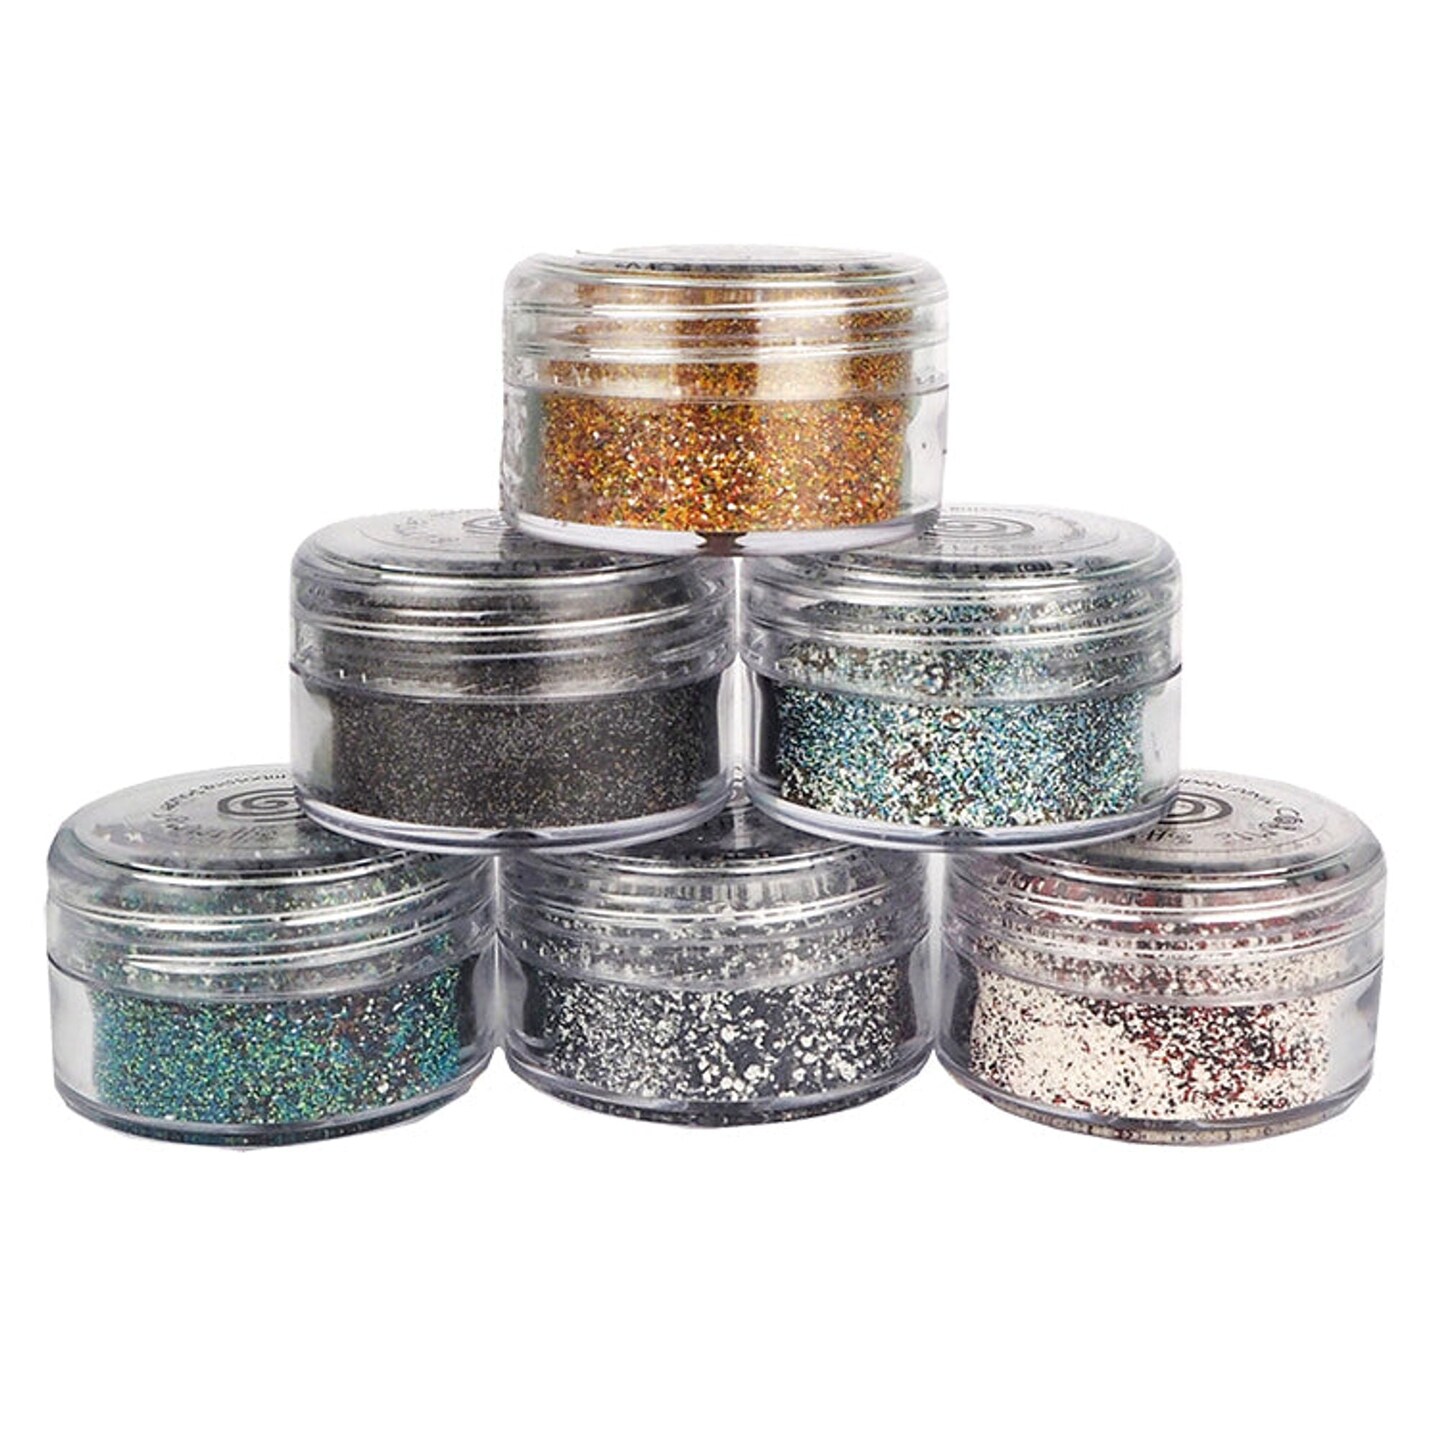 Cosmic Shimmer  Mixed Media Embossing Powder - Stone Age